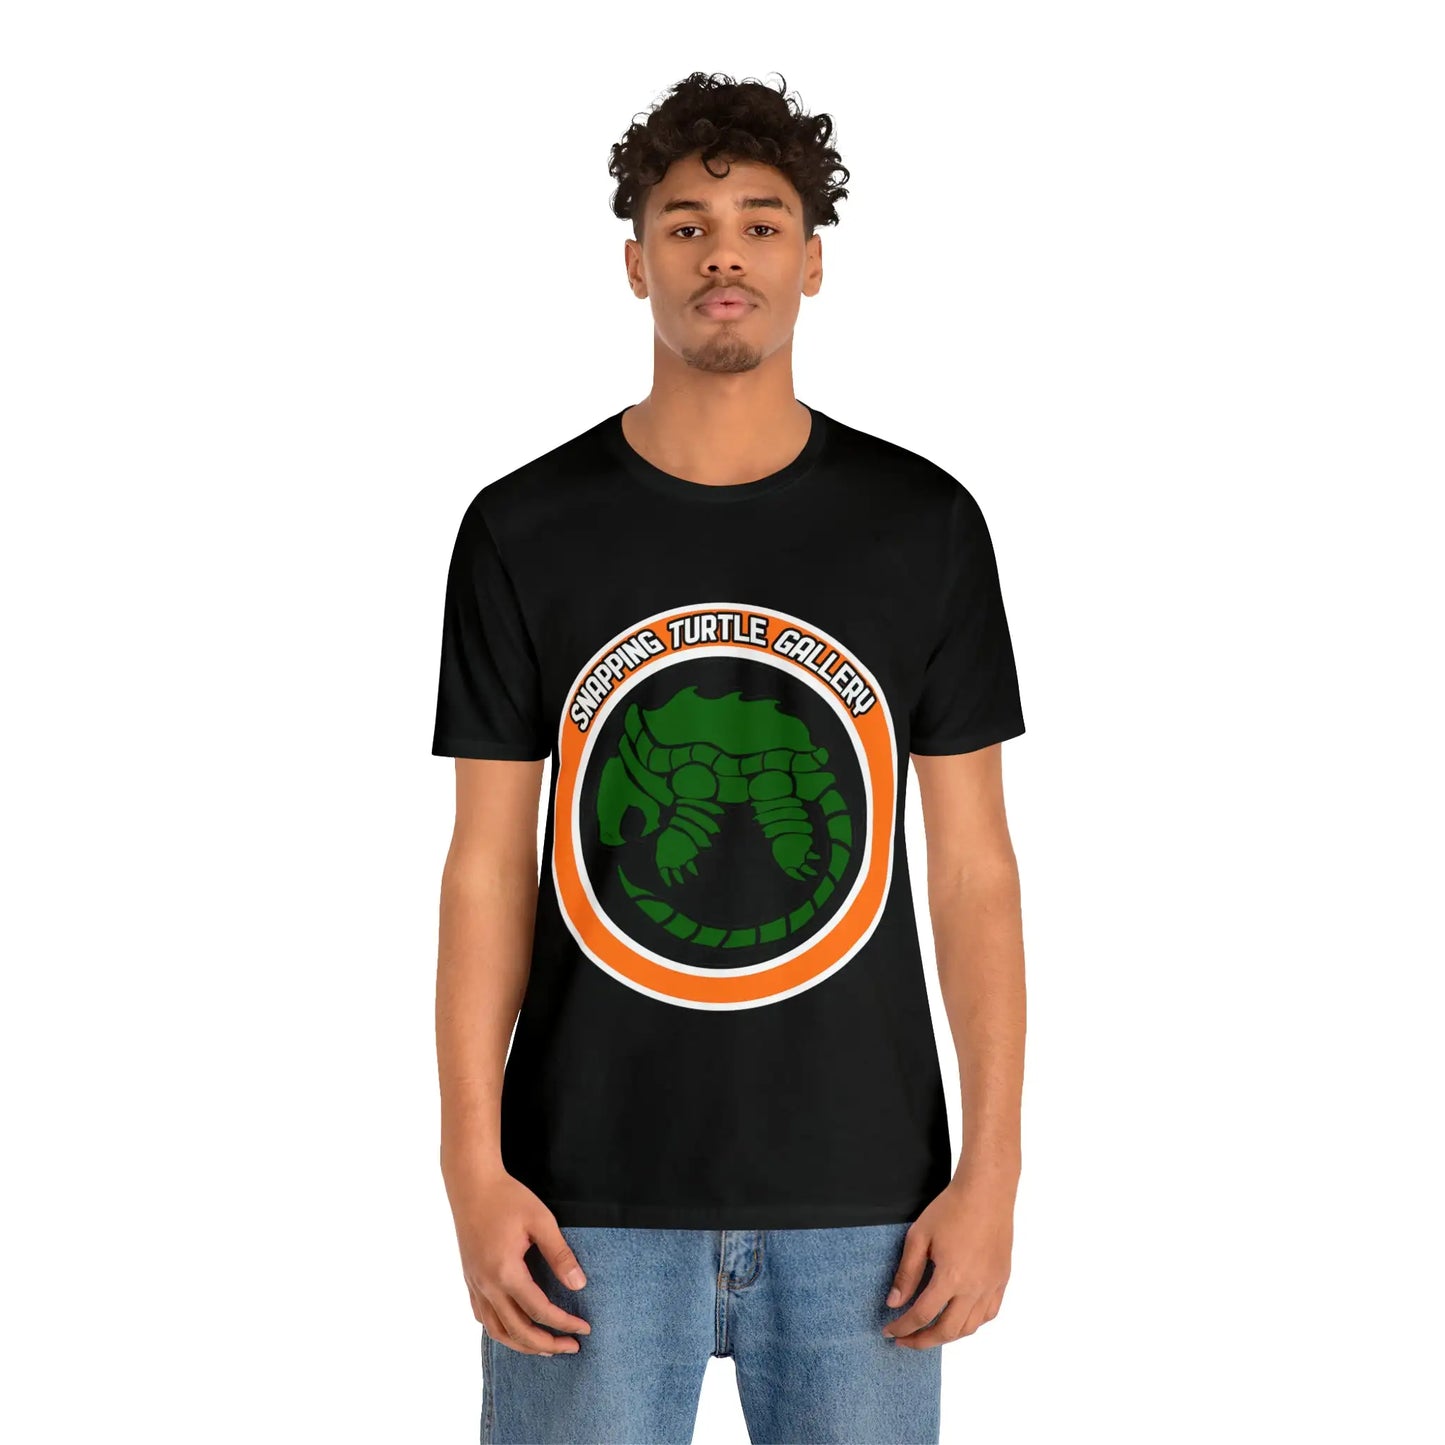 Snapping Turtle Gallery Logo Shirt 3